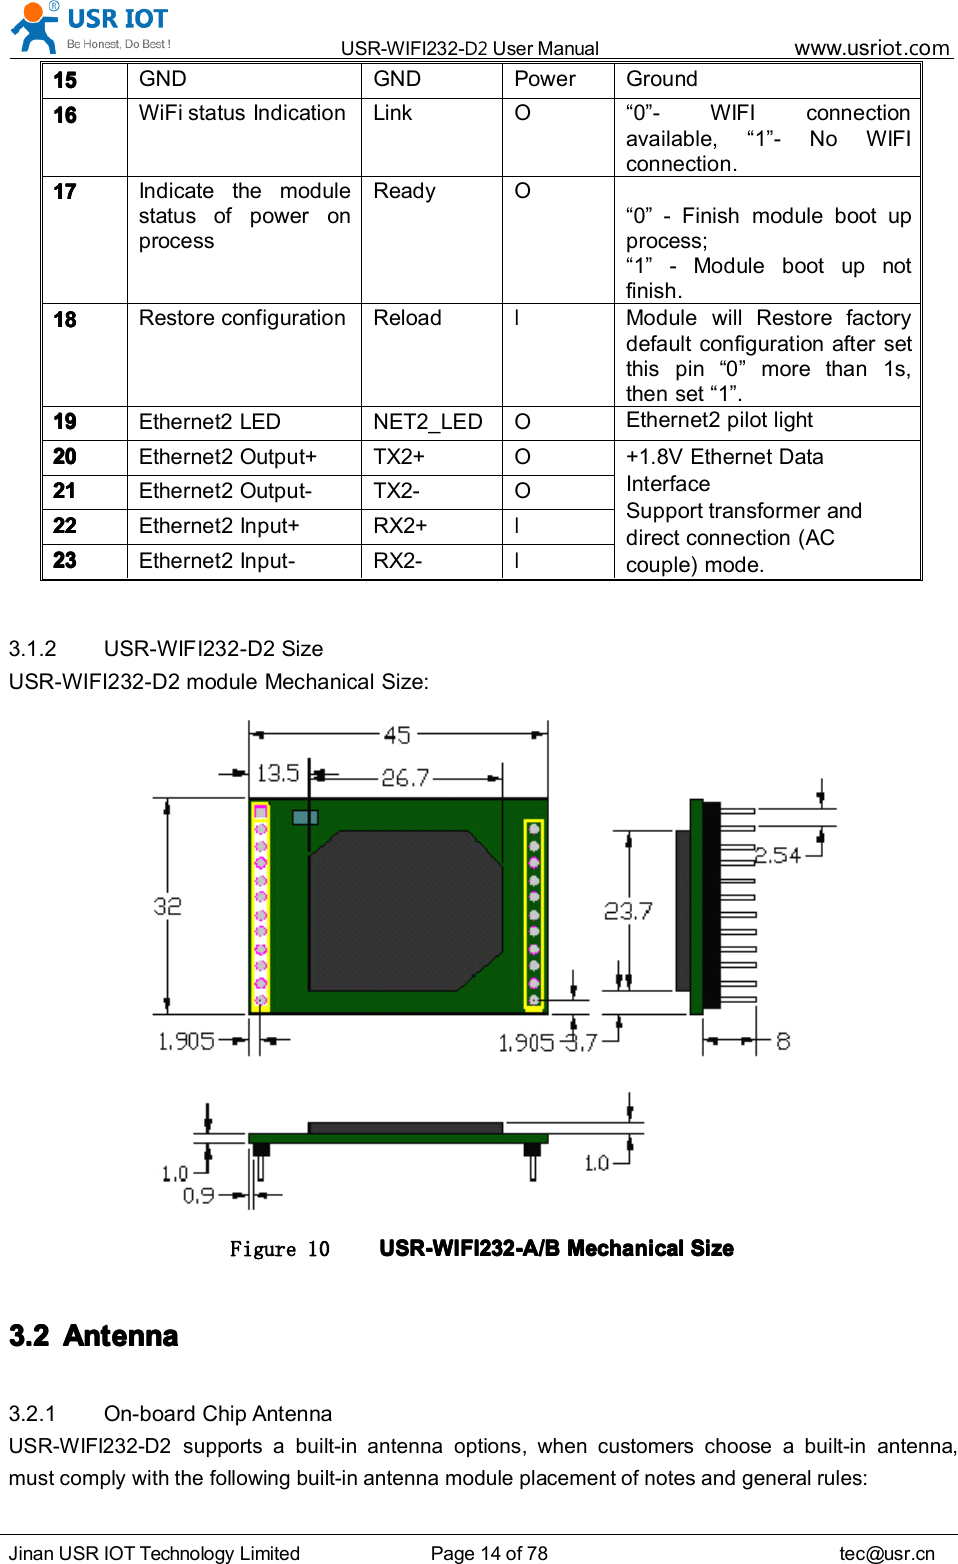 USR-WIFI232- D2 User Manual www.usr iot .comJinan USR IOT Technology Limited Page 14 of 78 tec@usr.cn15151515GND GND Power Ground16161616WiFi status Indication L ink O “ 0 ” - WIFI connectionavailable, “ 1 ” - No WIFIconnection .17171717Indicate the modulestatus of power onprocessReady O“ 0 ” - Finish module boot upprocess;“ 1 ” - Module boot up notfinish.18181818Restore configuration ReloadIModule will Restore factorydefault configuration after setthis pin “ 0 ” more than 1s,then set “ 1 ” .19191919 Ethernet2 LED NET2_LED OEthernet2 pilot light20202020 Ethernet 2 Output+ TX2+ O +1.8V Ethernet DataInterfaceSupport transformer anddirect connection (ACcouple) mode.21212121 Ethernet 2 Output - TX2- O22222222 Ethernet 2 Input+ RX2+I23232323 Ethernet 2 Input - RX2-I3.1.2 USR-WIFI232-D2 SizeUSR-WIFI232- D2 module Mechanical Size:Figure 10 USR-WIFI232-USR-WIFI232-USR-WIFI232-USR-WIFI232- A/BA/BA/BA/B MechanicalMechanicalMechanicalMechanical SizeSizeSizeSize3.23.23.23.2 AntennaAntennaAntennaAntenna3.2.1 On-board Chip AntennaUSR-WIFI232-D2 supports a built-in antenna options, when customers choose a built-in antenna,must comply with the following built-in antenna module placement of notes and general rules: